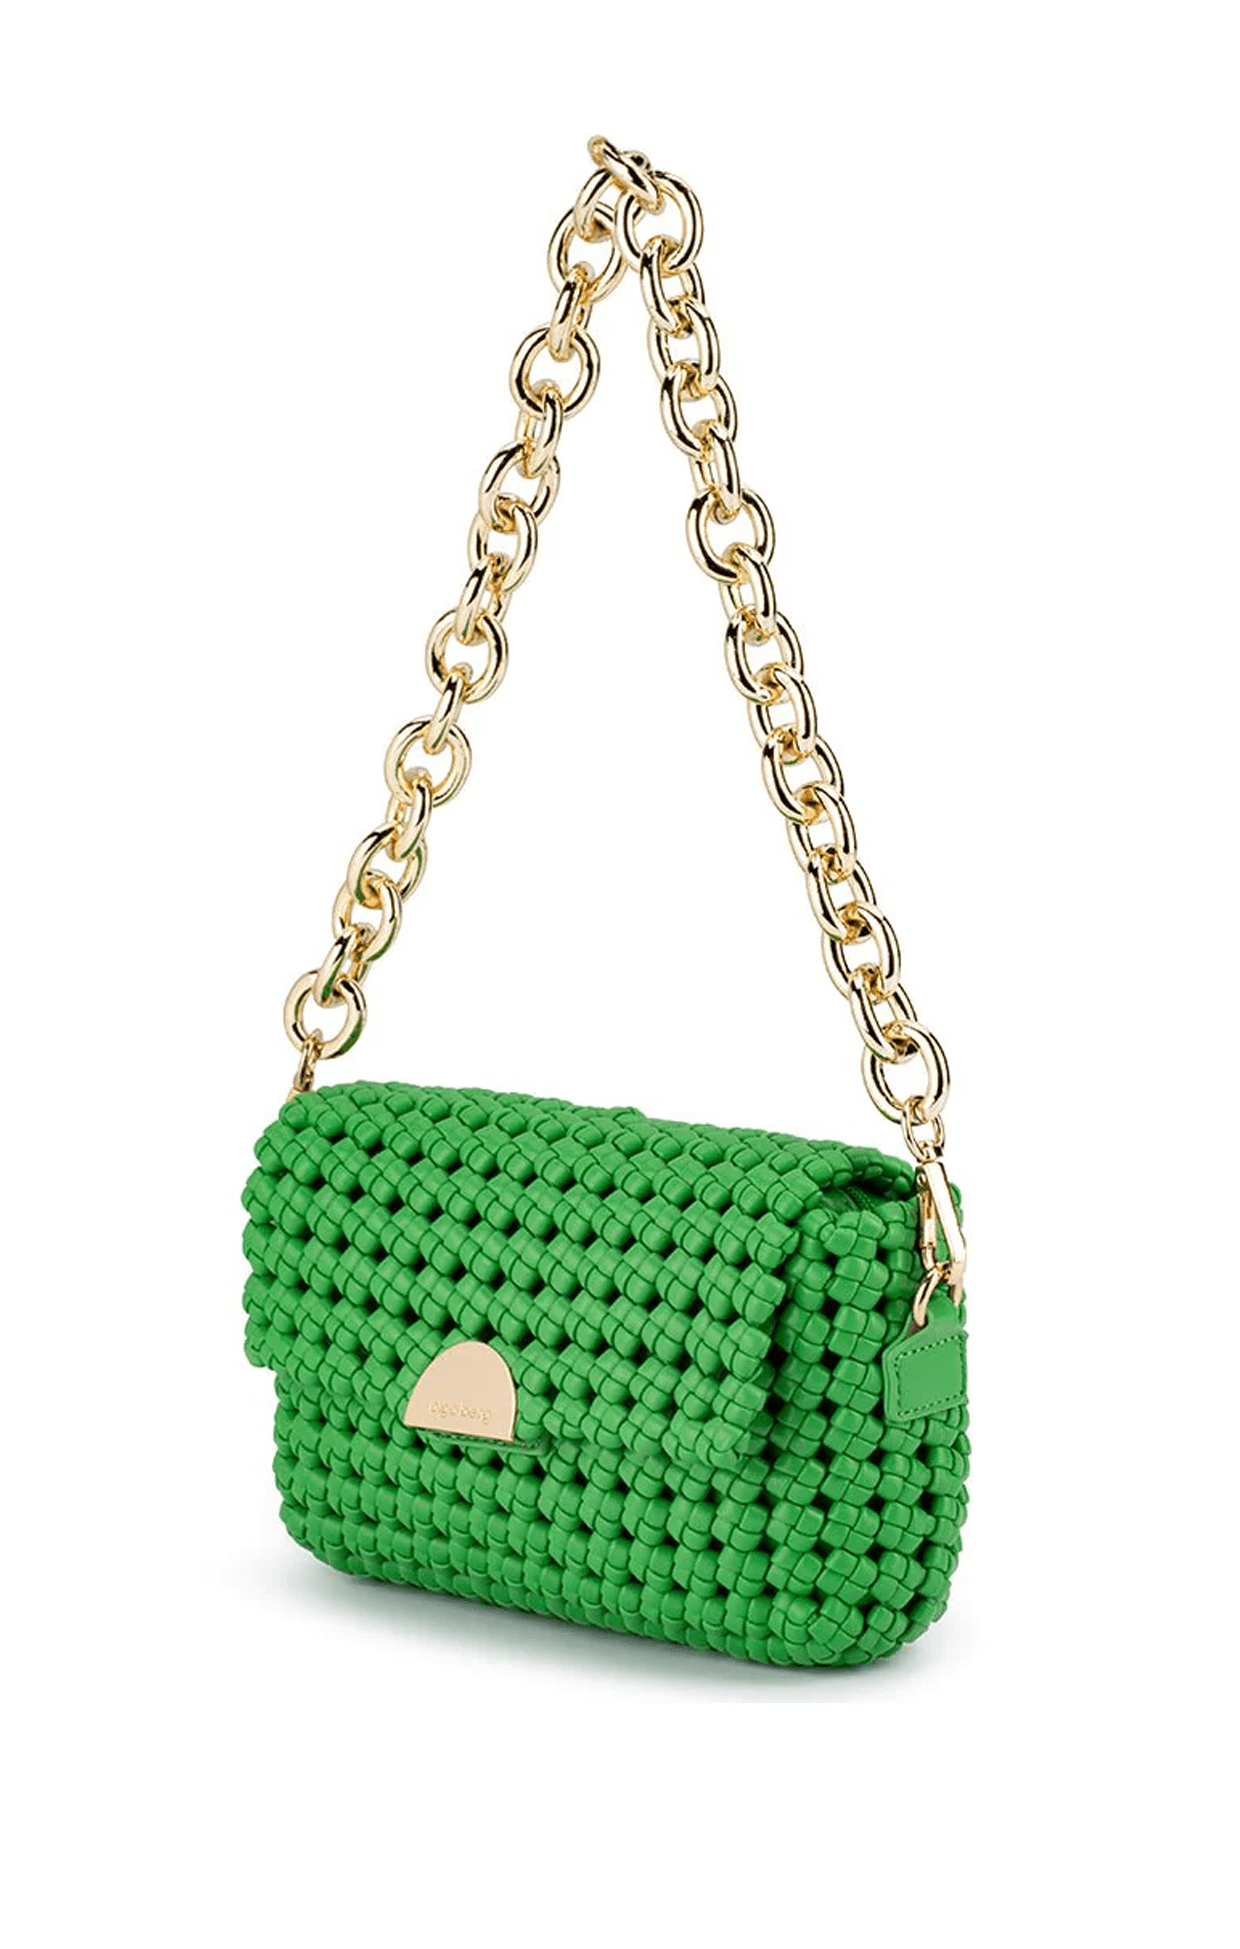 ACCESSORIES Bags Clutches One Size / Green GISELLE WOVEN SHOULDER BAG IN GREEN